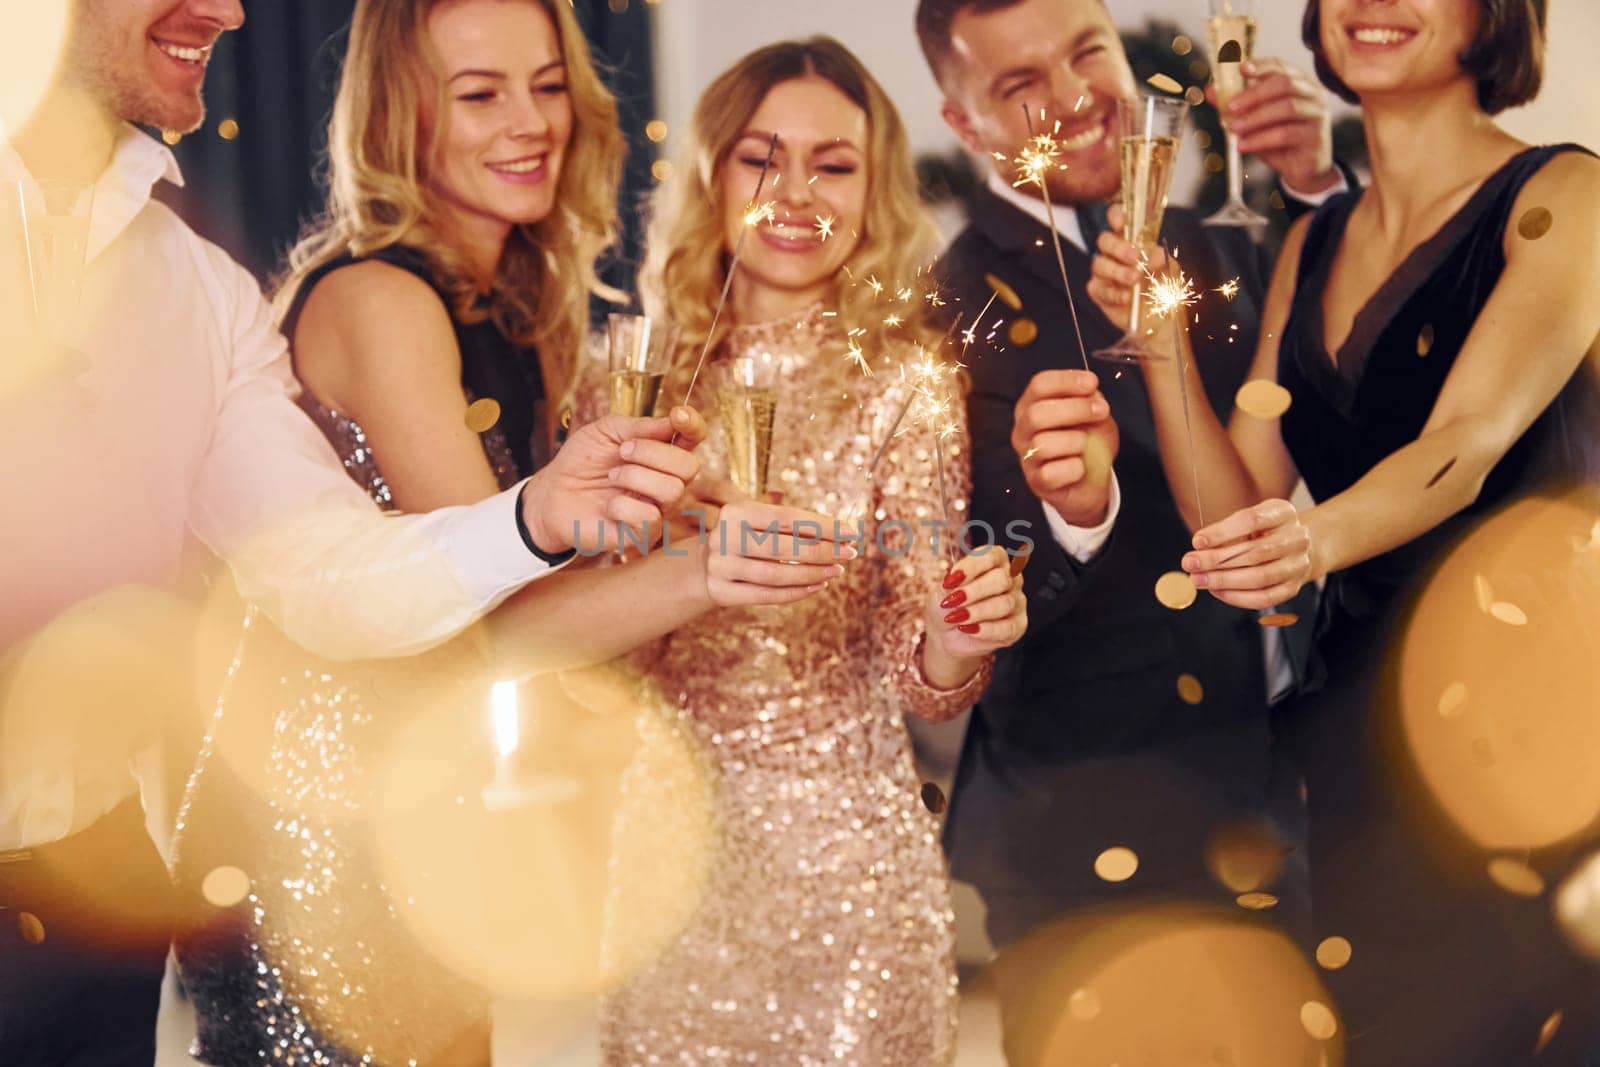 Celebration of new year. Group of people have a new year party indoors together by Standret